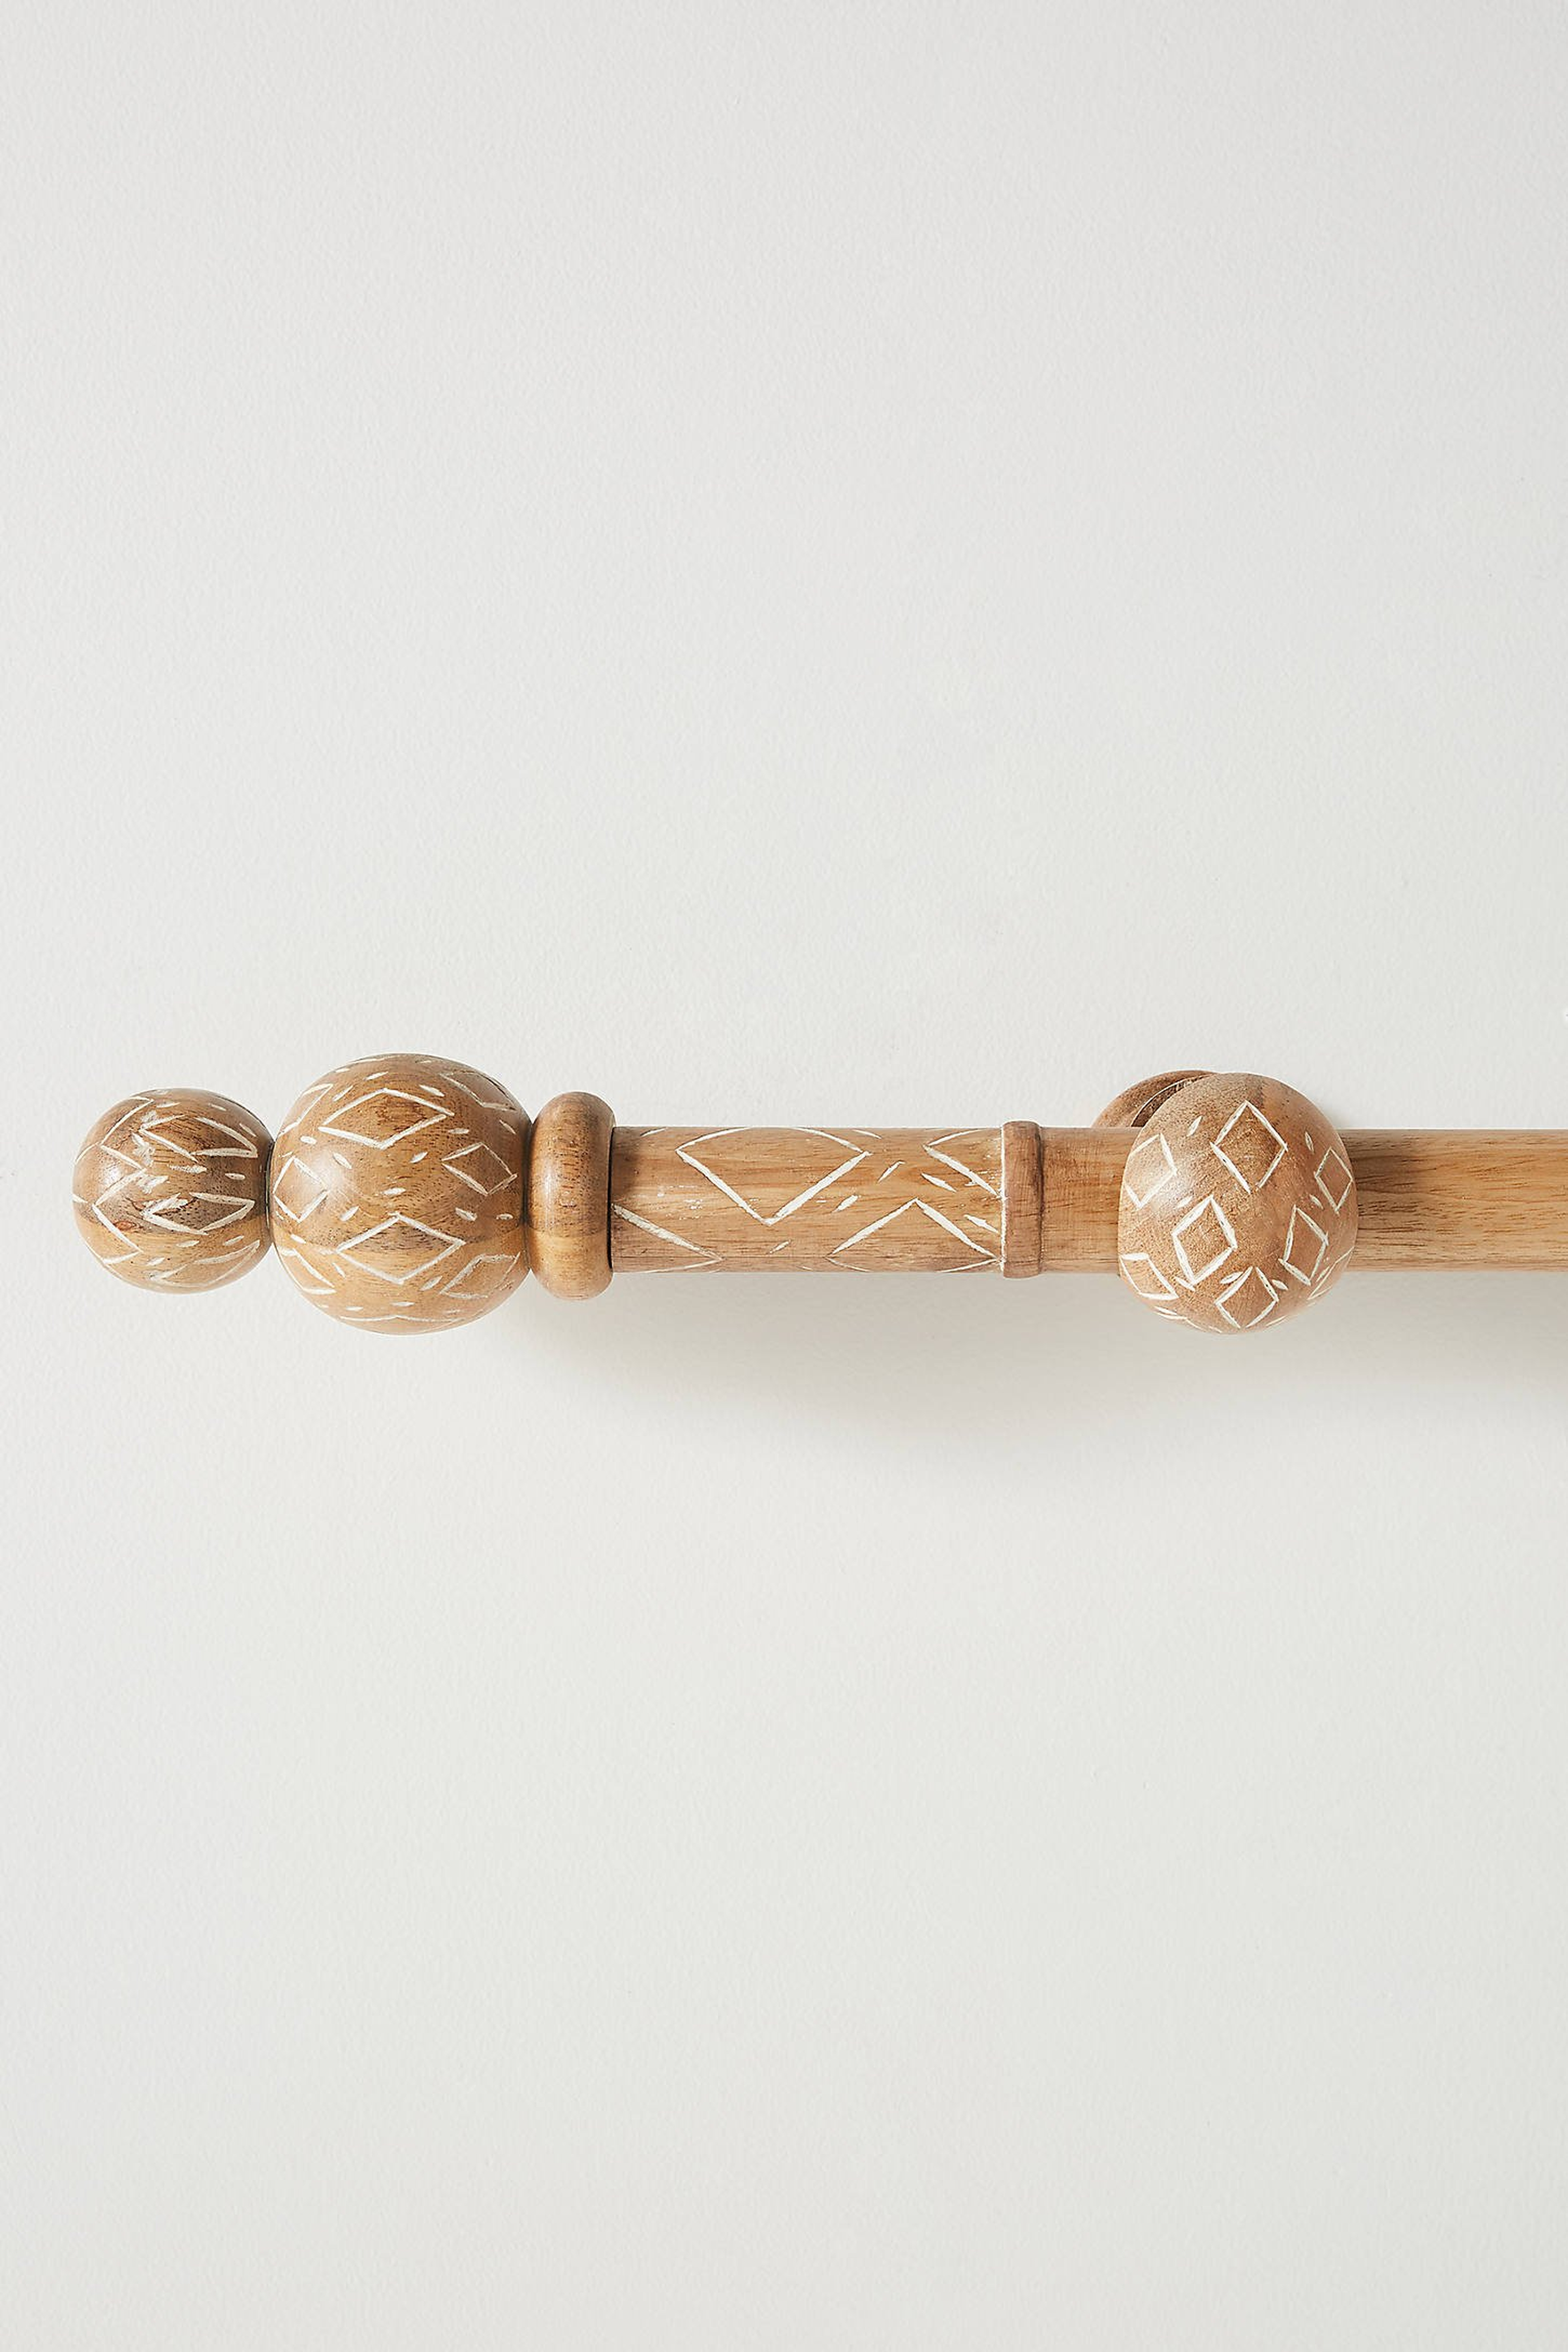 Kamala Curtain Rod By Anthropologie in Assorted - Anthropologie